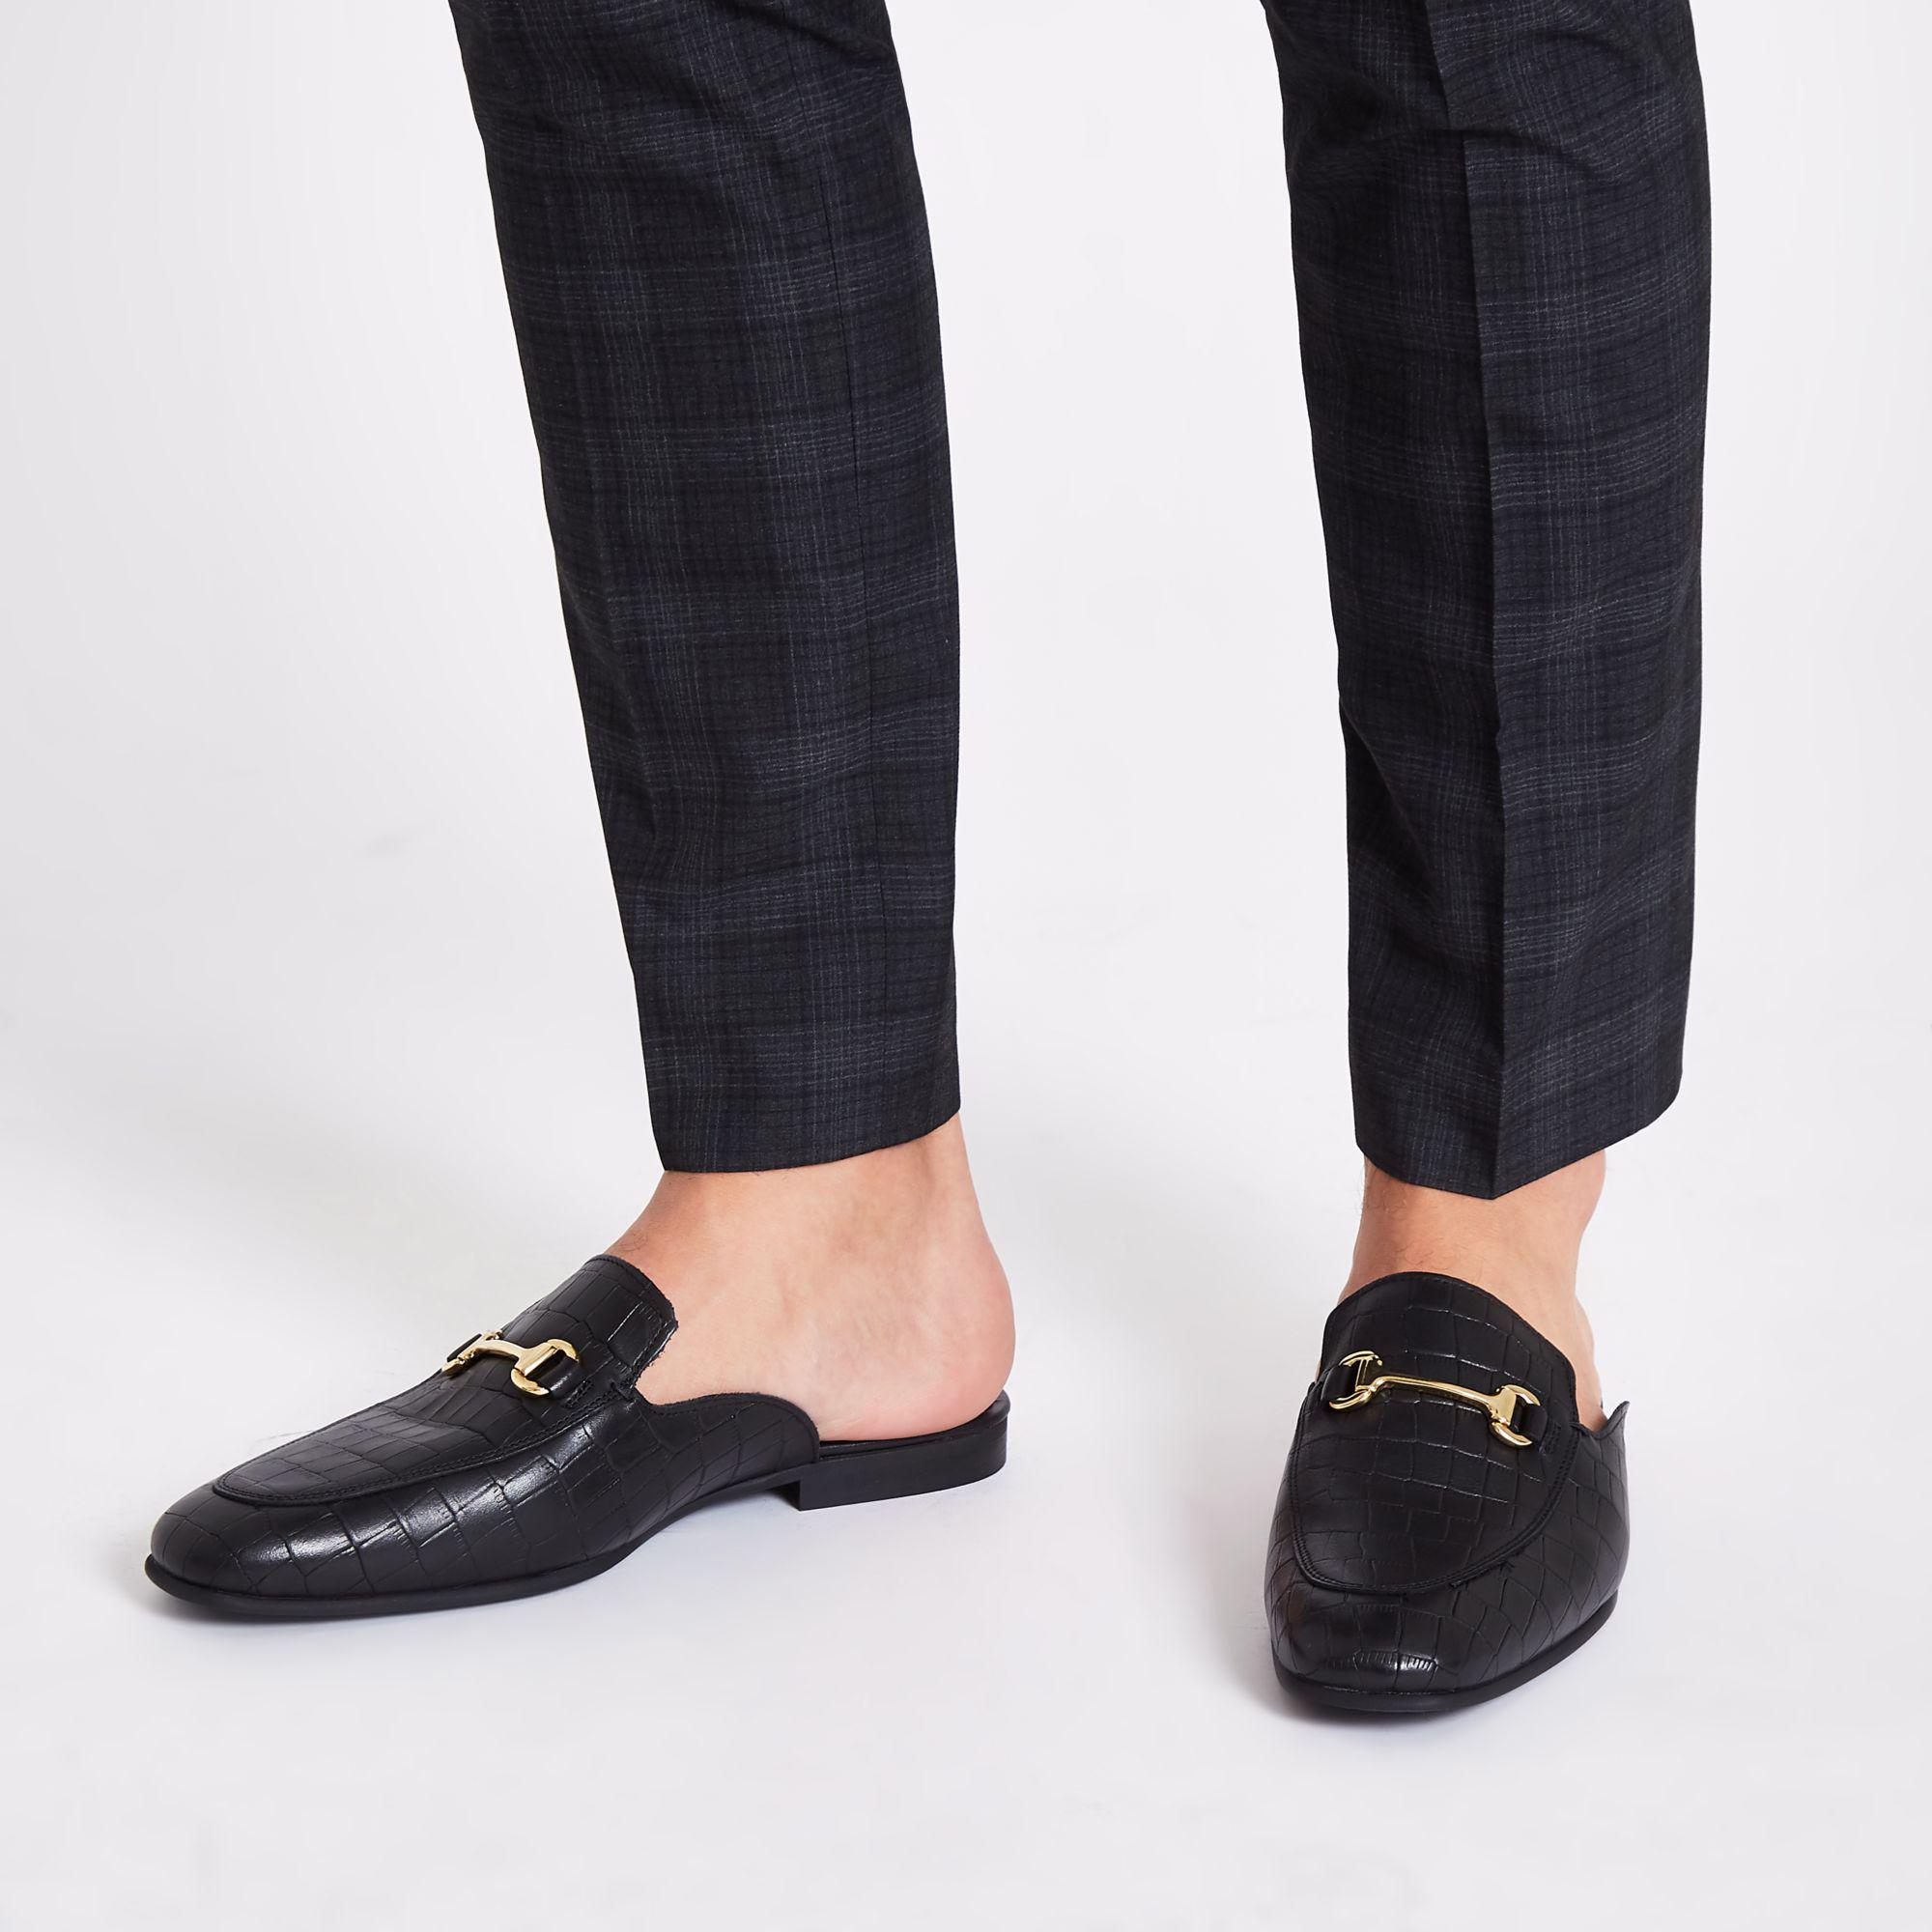 River Island Loafers Online Sale, UP TO 67% OFF